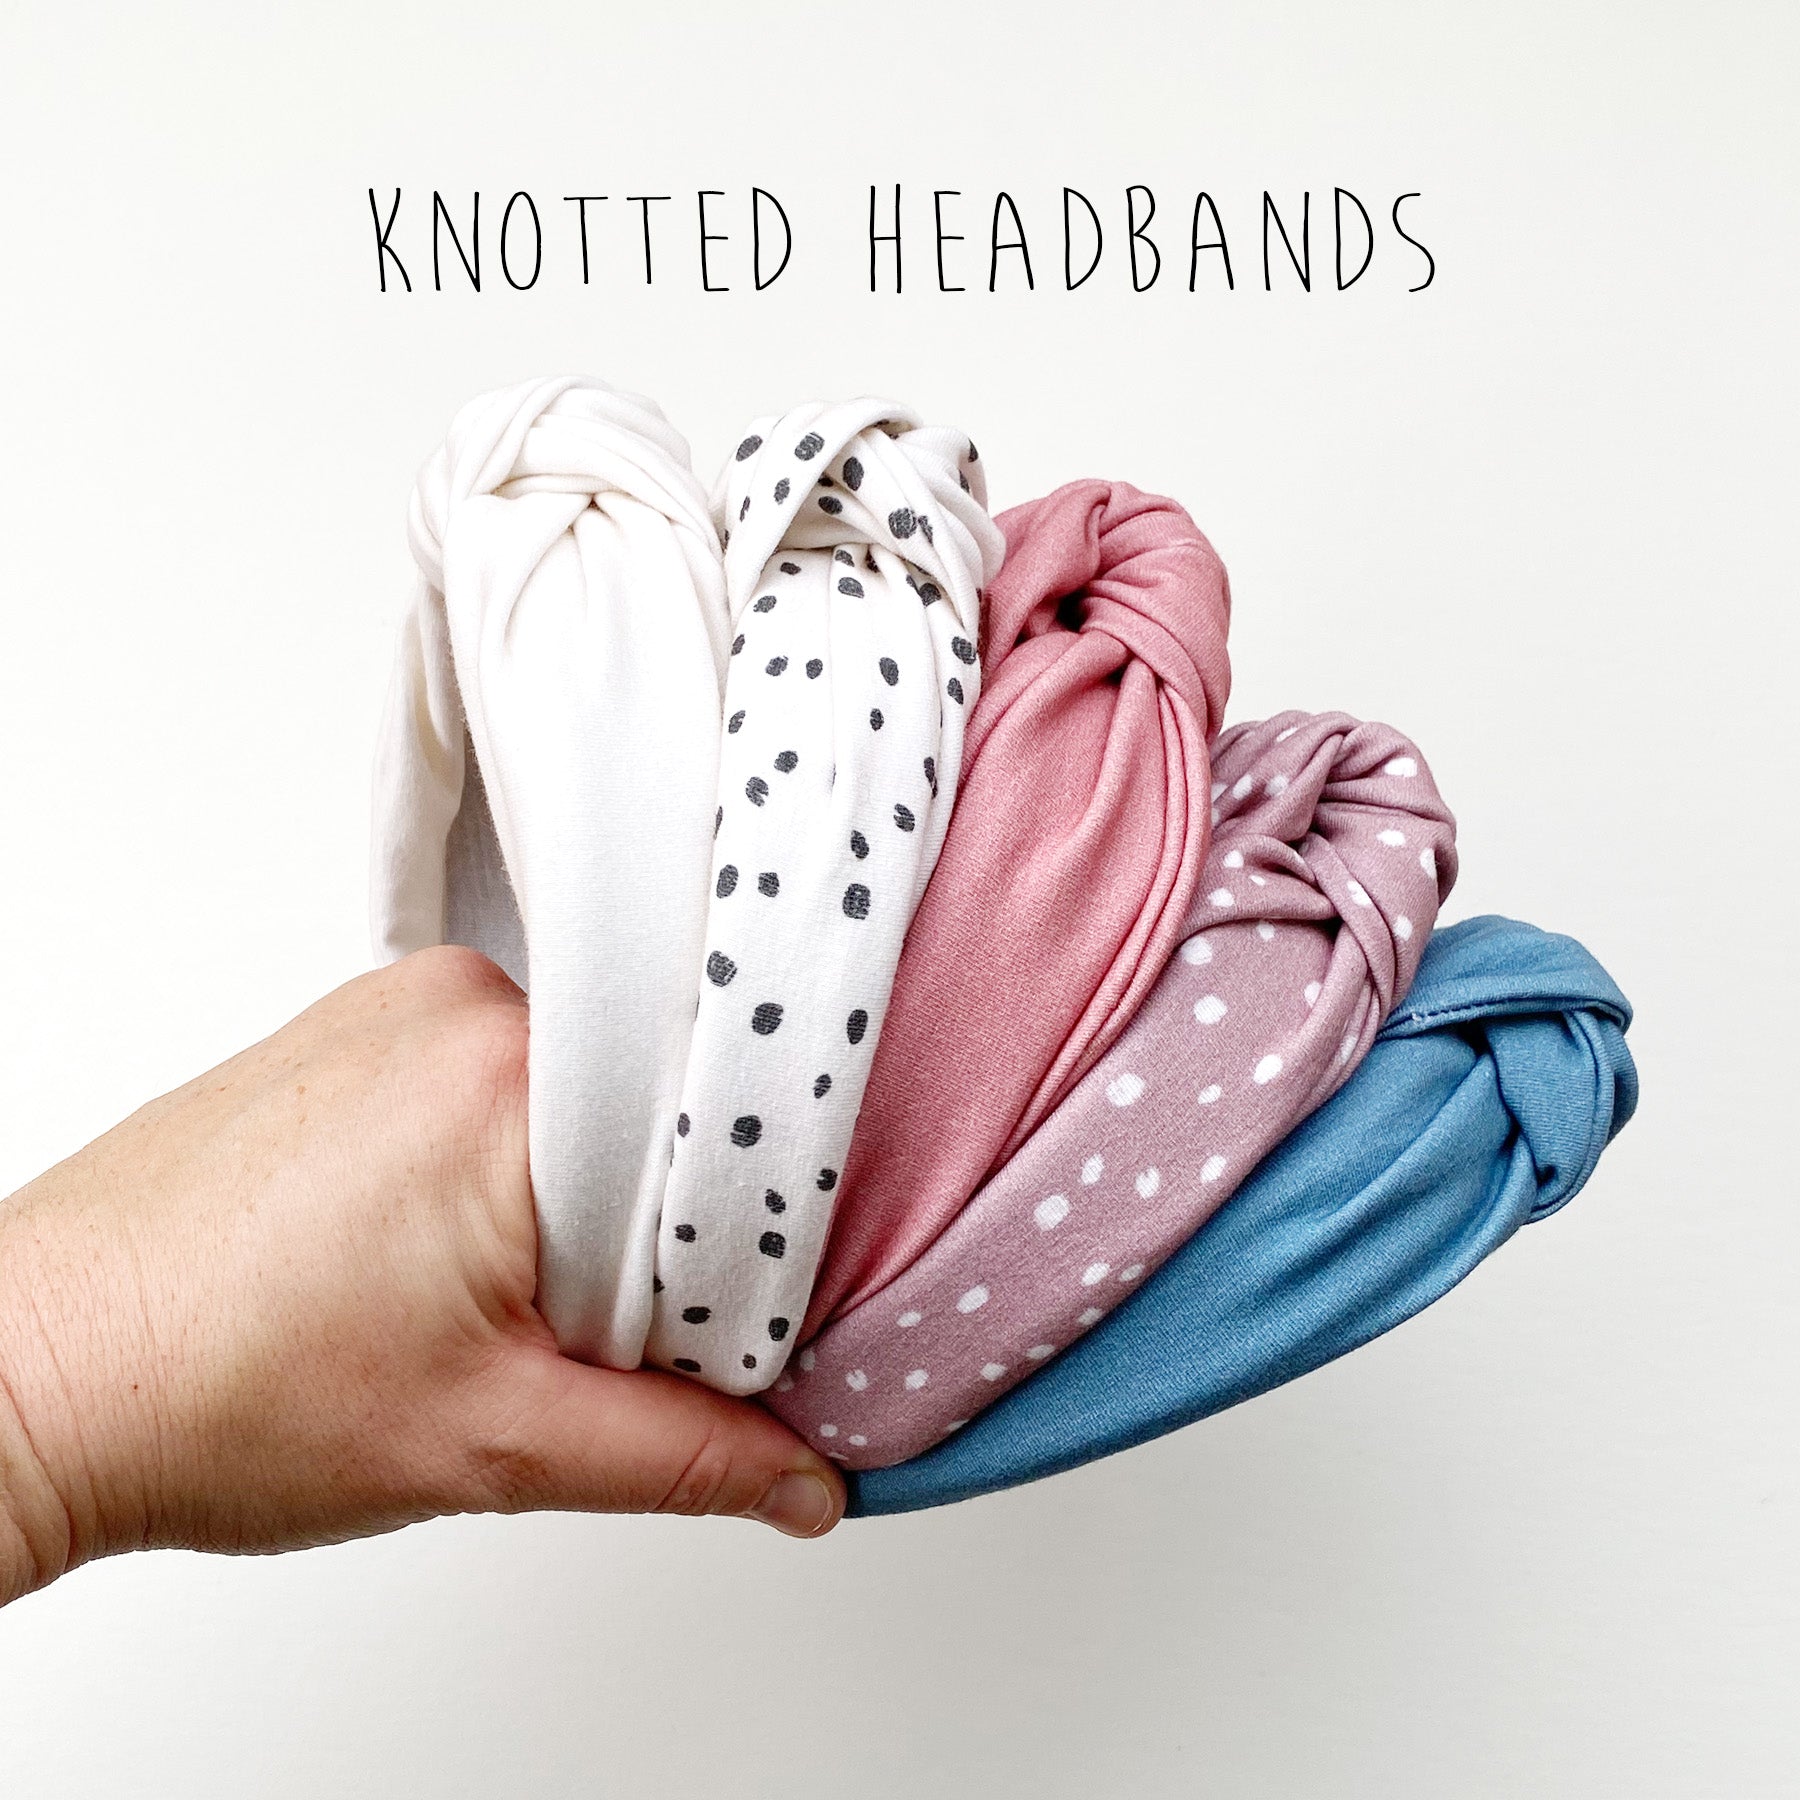 KNOTTED HEADBANDS